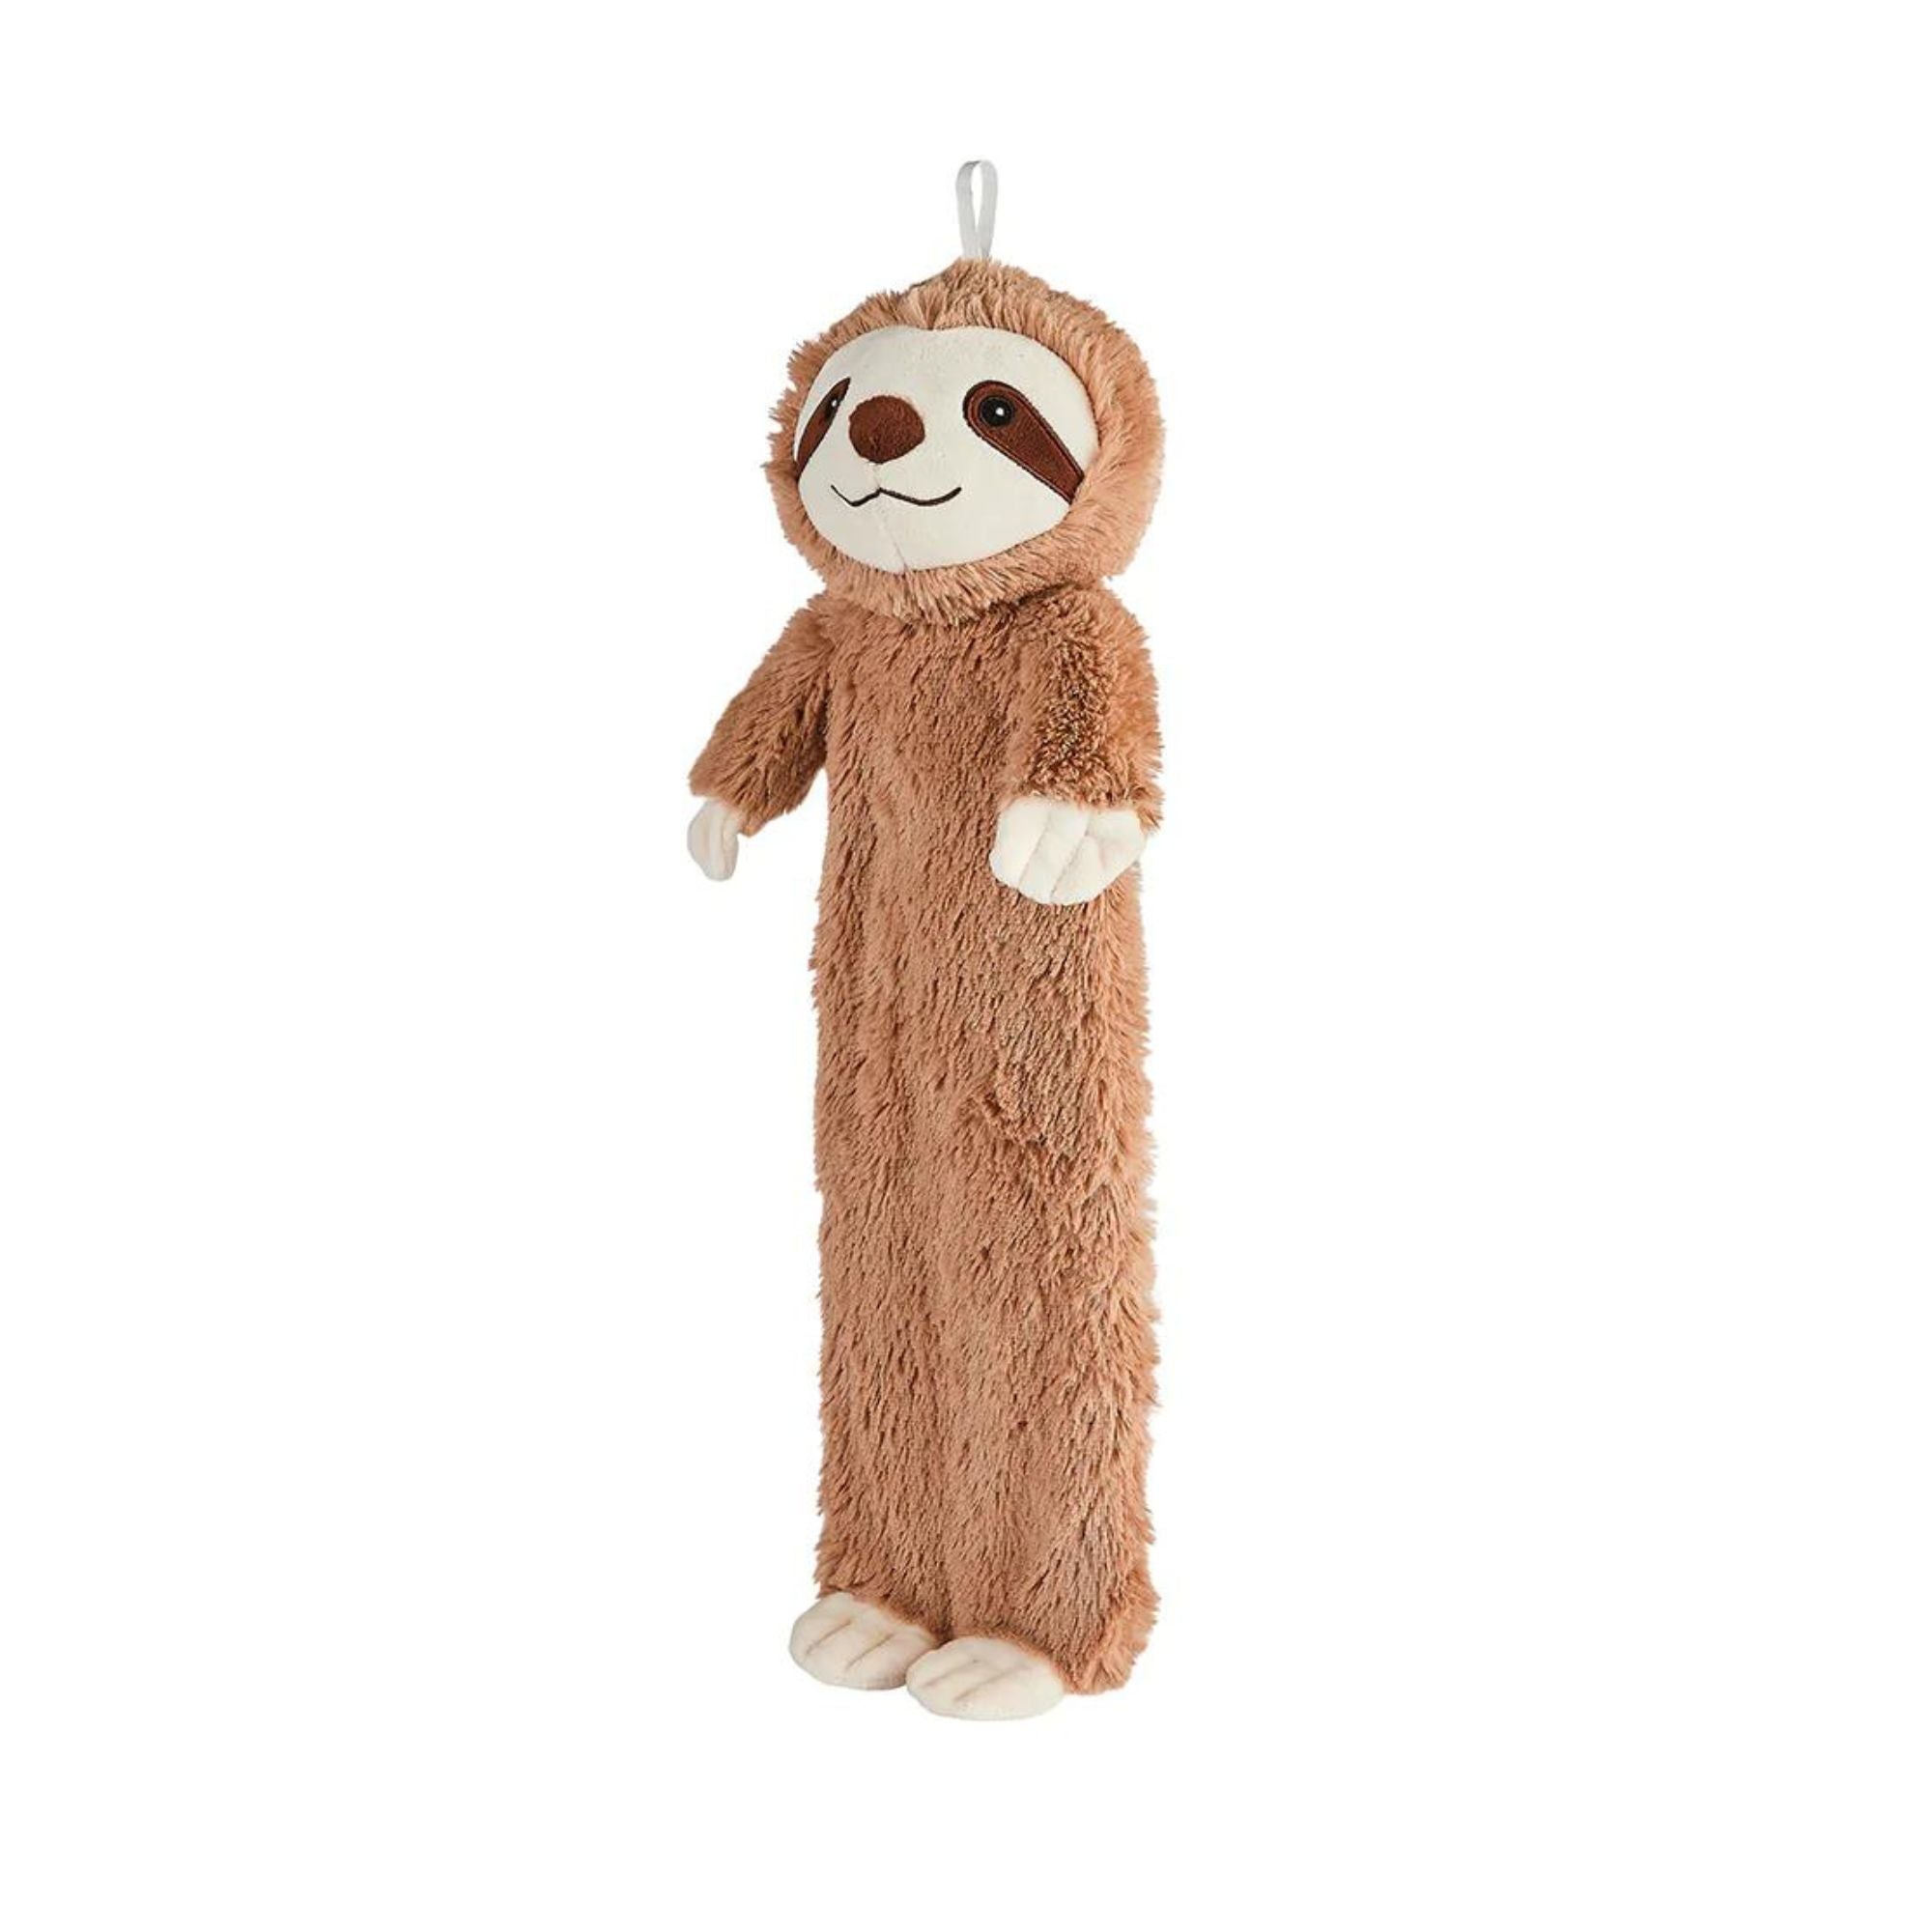 3D Midi Hot Water Bottle with Brown Sloth Faux Fur Cover